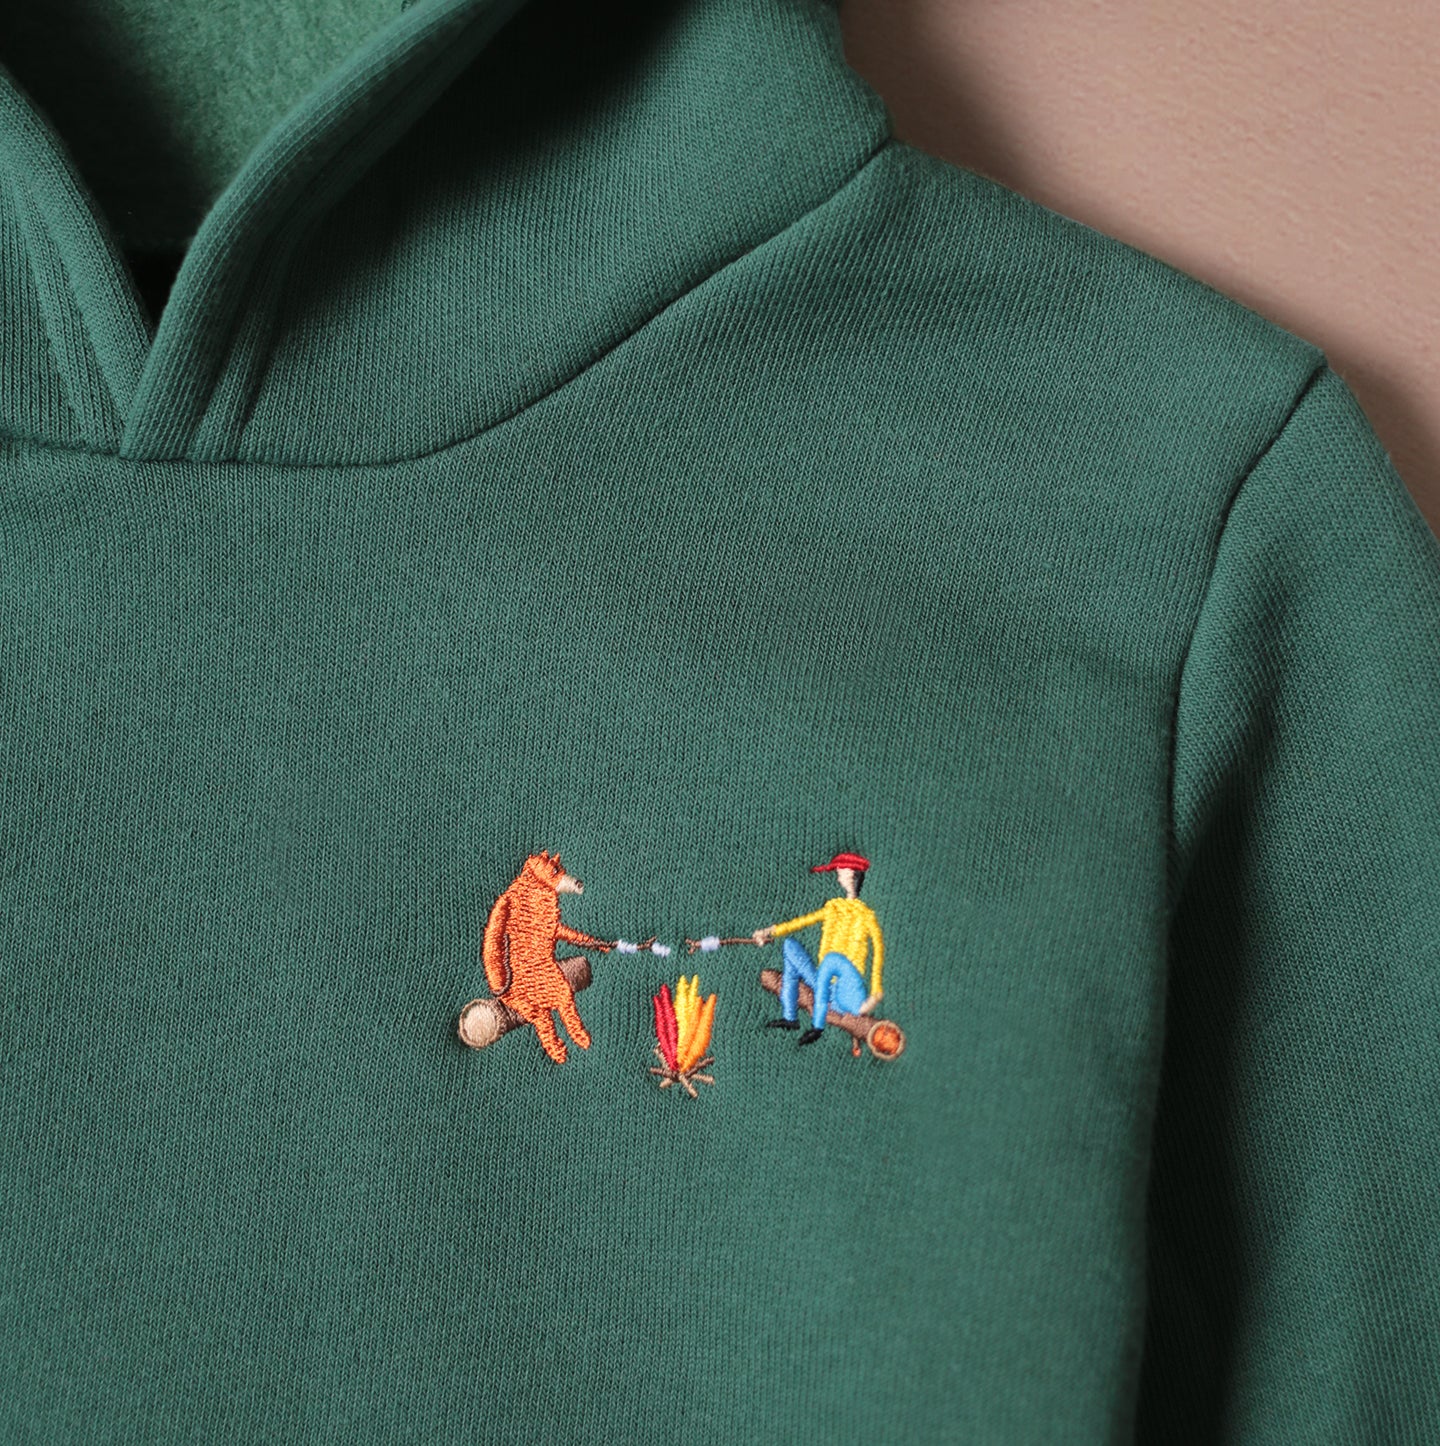 Kids Cabin Hoodie - Forest - Campfire Friends Embroidery - CAMP Series